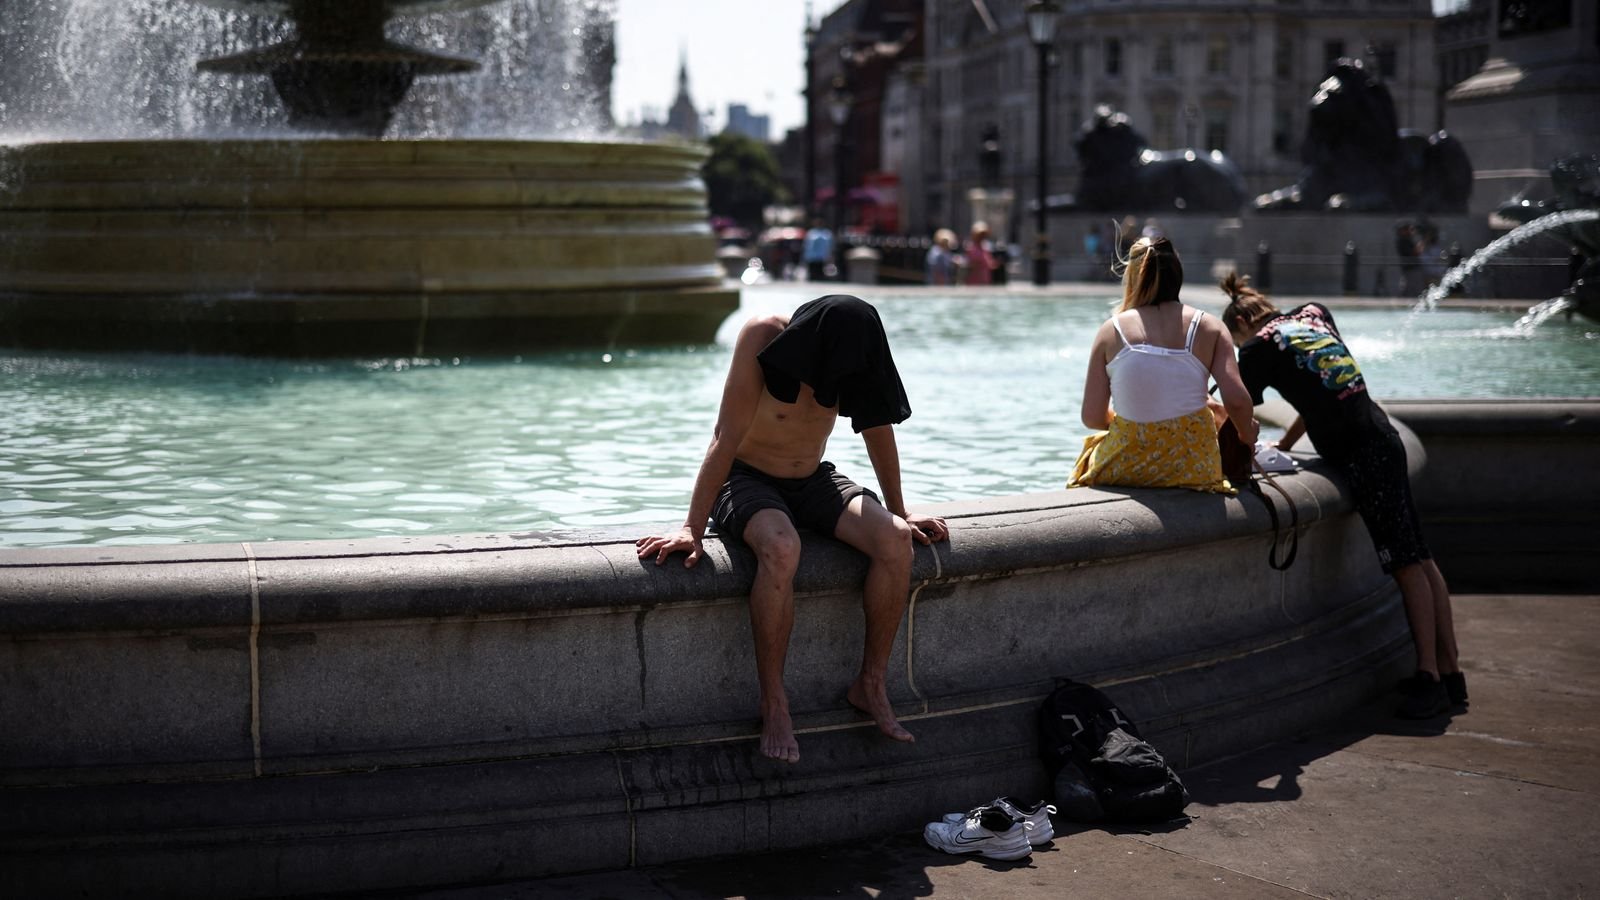 UK heatwave: New record as temperature hits 40.3C